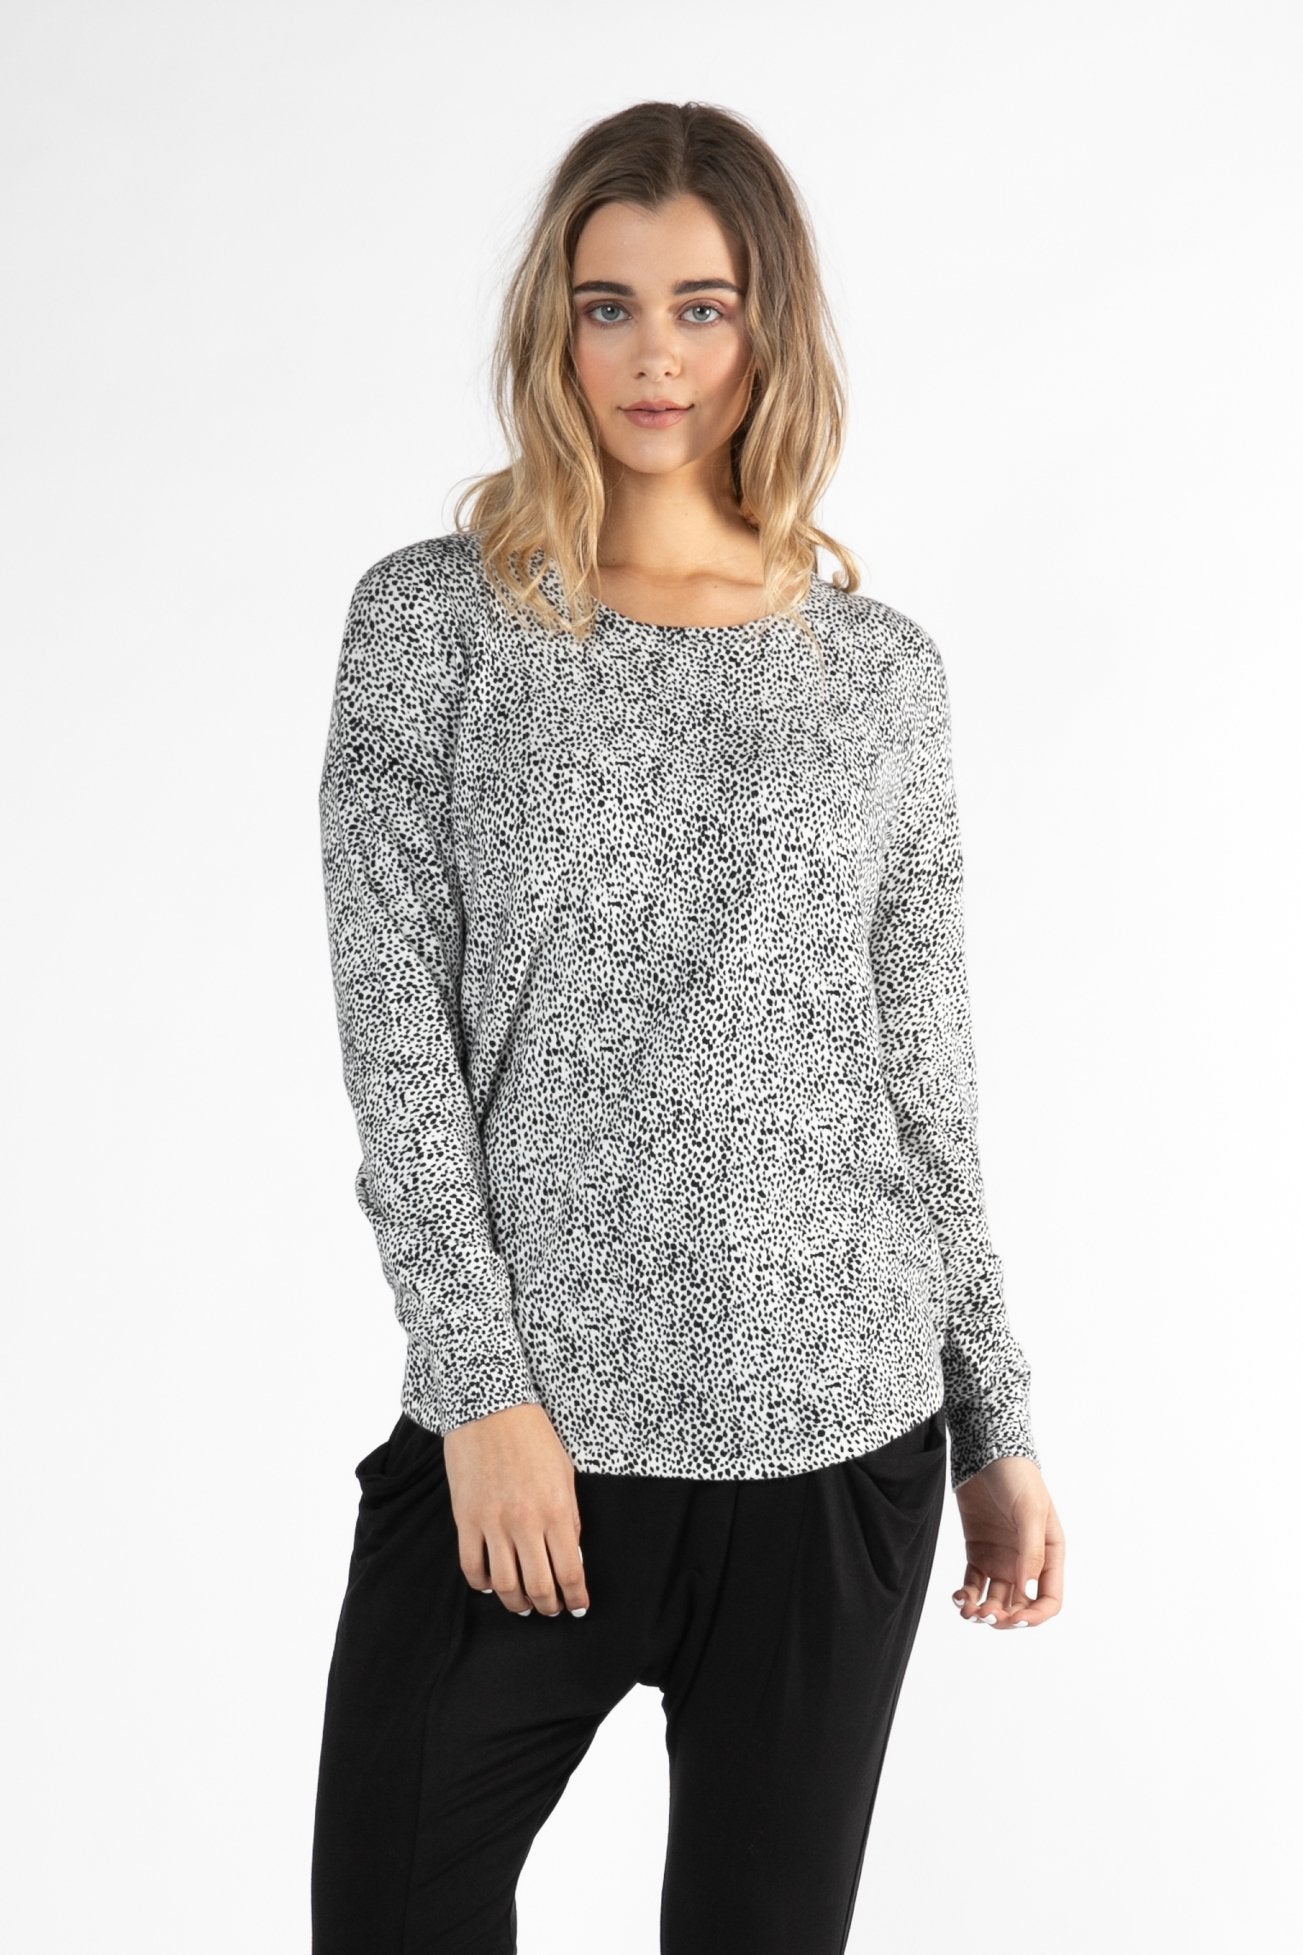 Betty Basics Sophie Knit Jumper in White and Black Print - Hey Sara